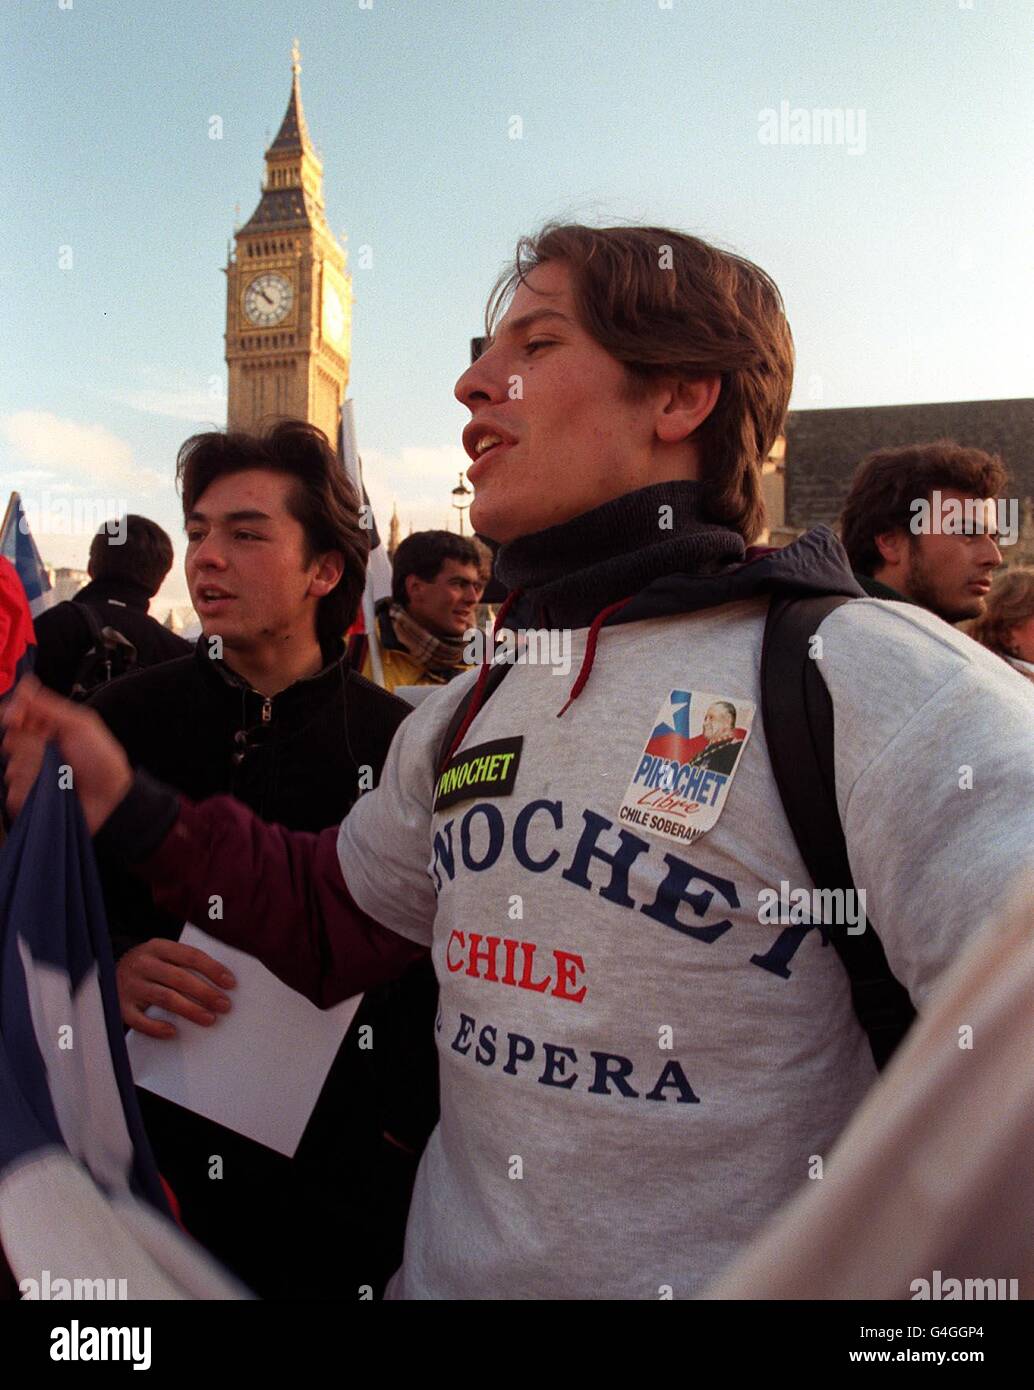 Pro-Pinochet demonstrators in London's Westminster, where 7 Law Lords are due to begin a second hearing to decide the fate of Chile's former dictator, General Augusto Pinochet, wanted in Spain to face charges of genocide, terrorism and torture. Stock Photo